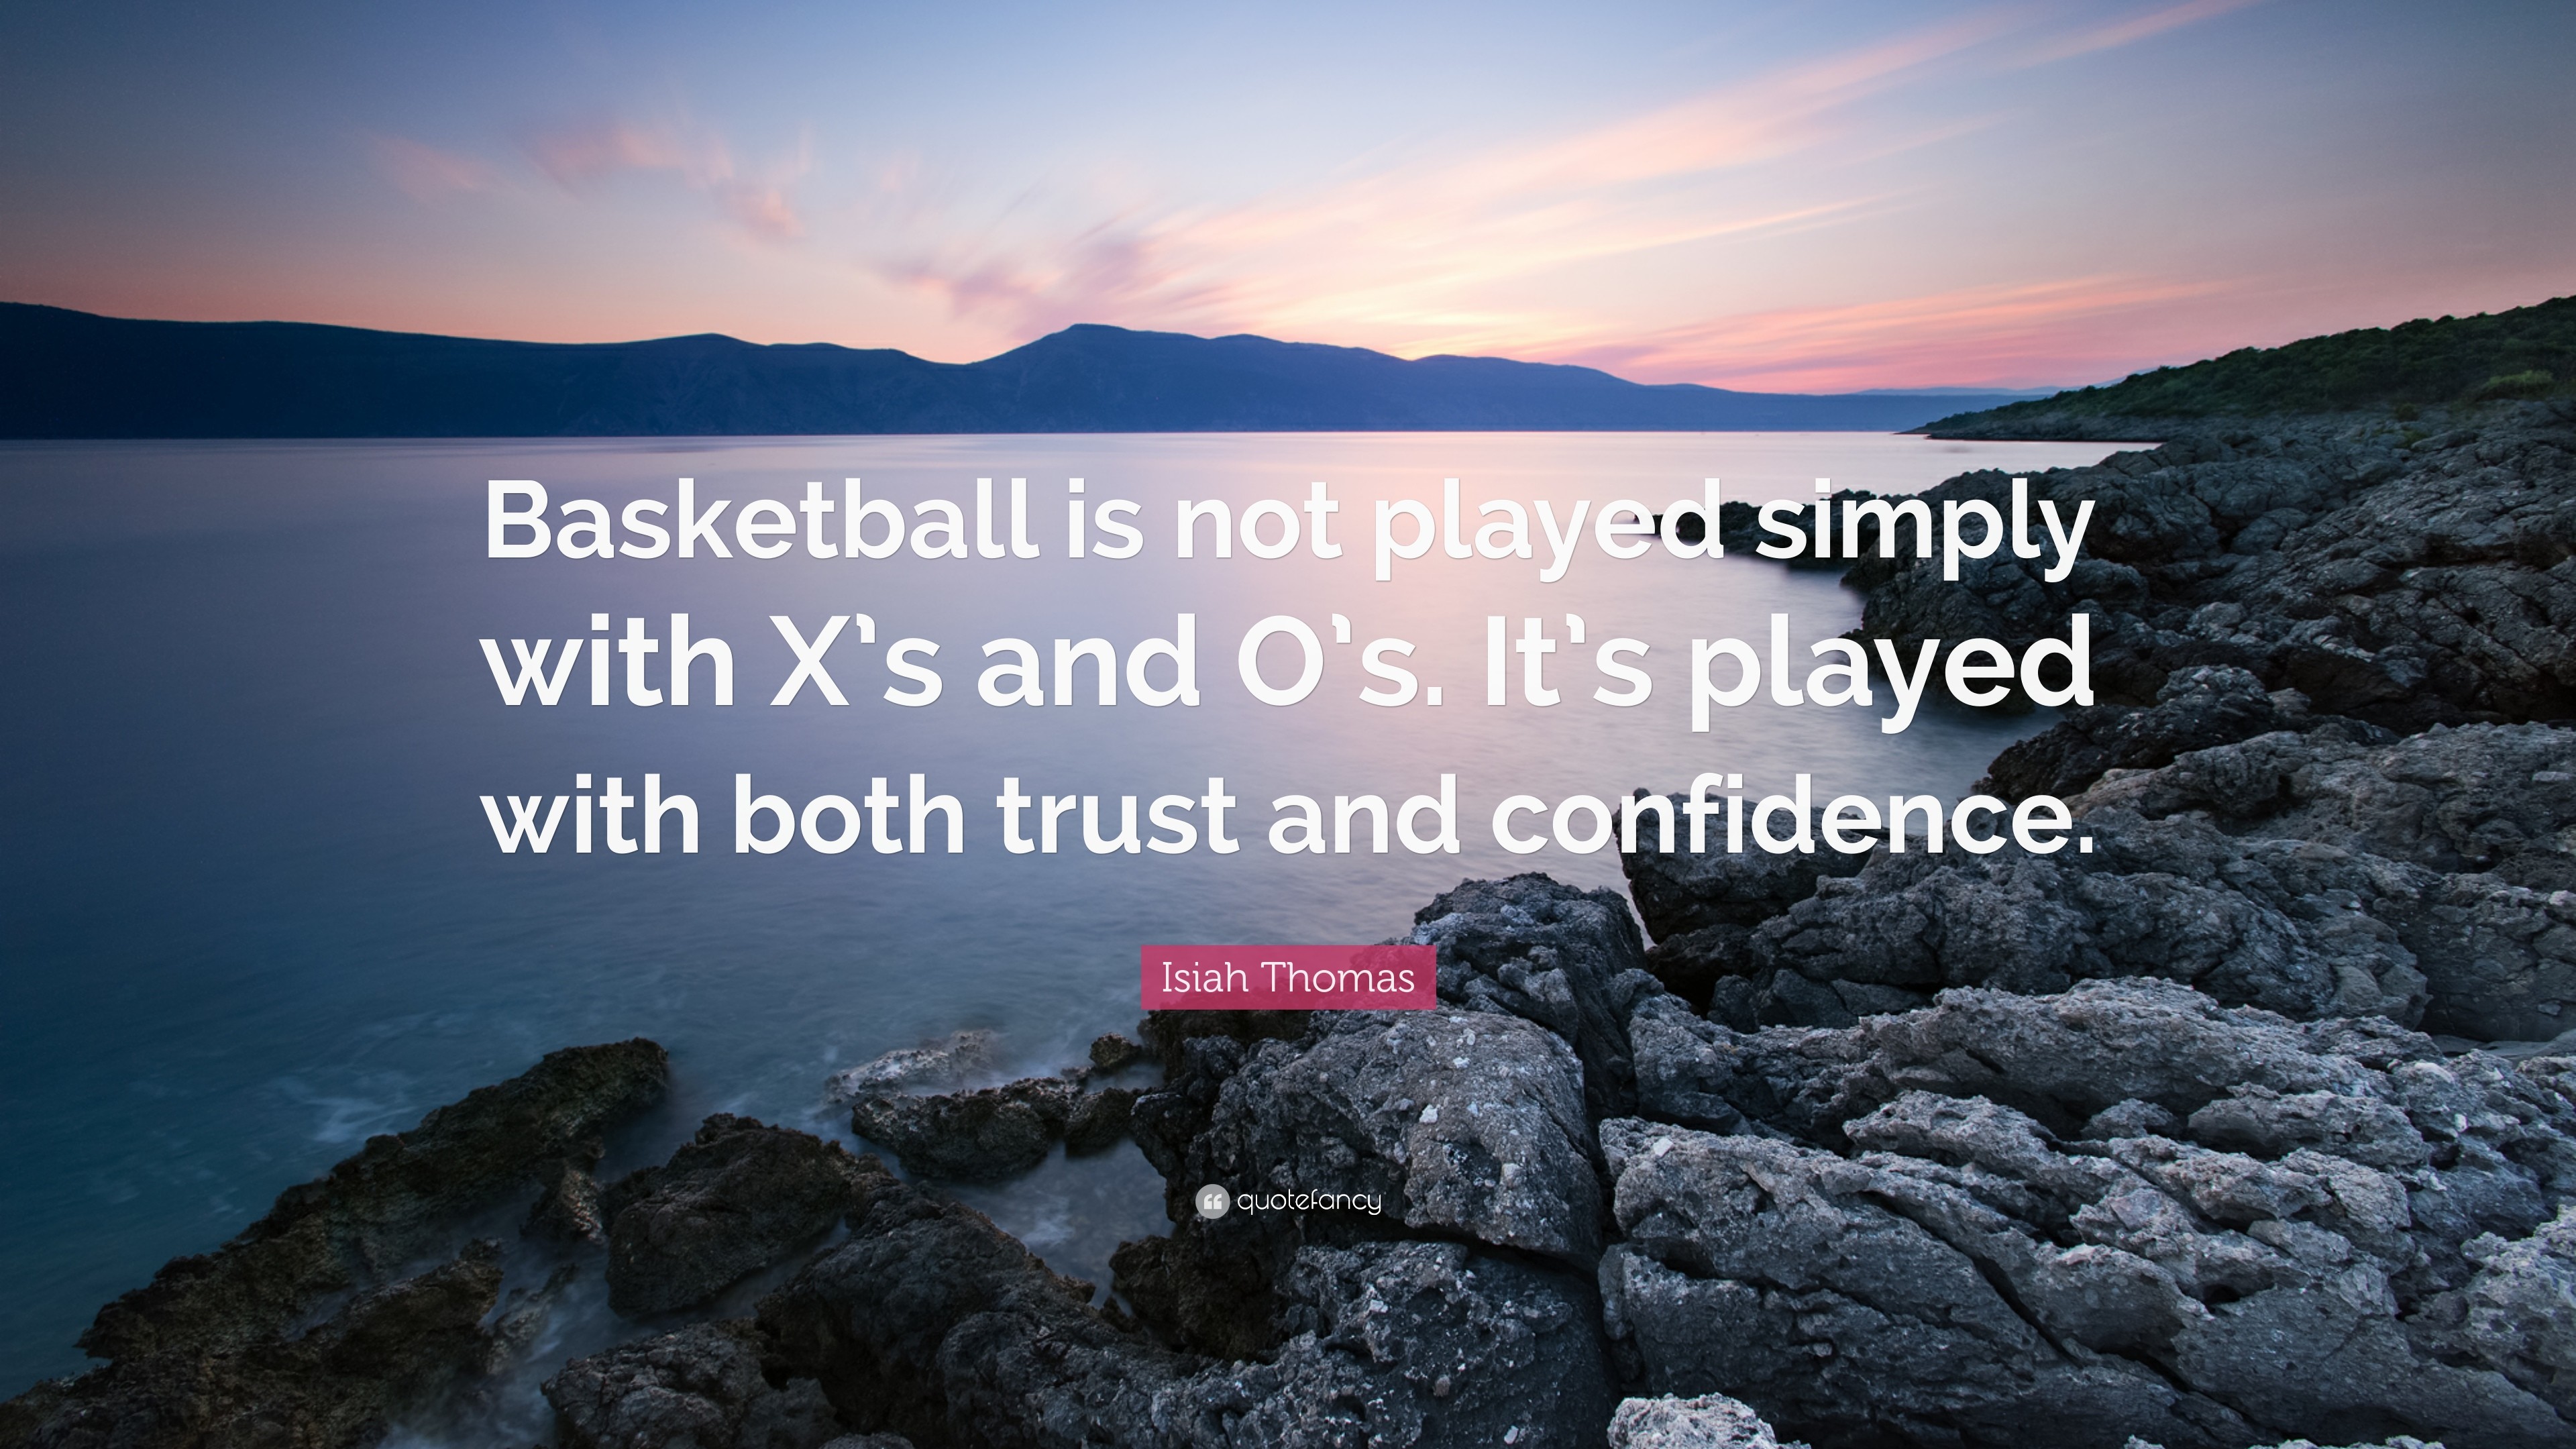 3840x2160 Isiah Thomas Quote: “Basketball is not played simply with X's and O's. It's